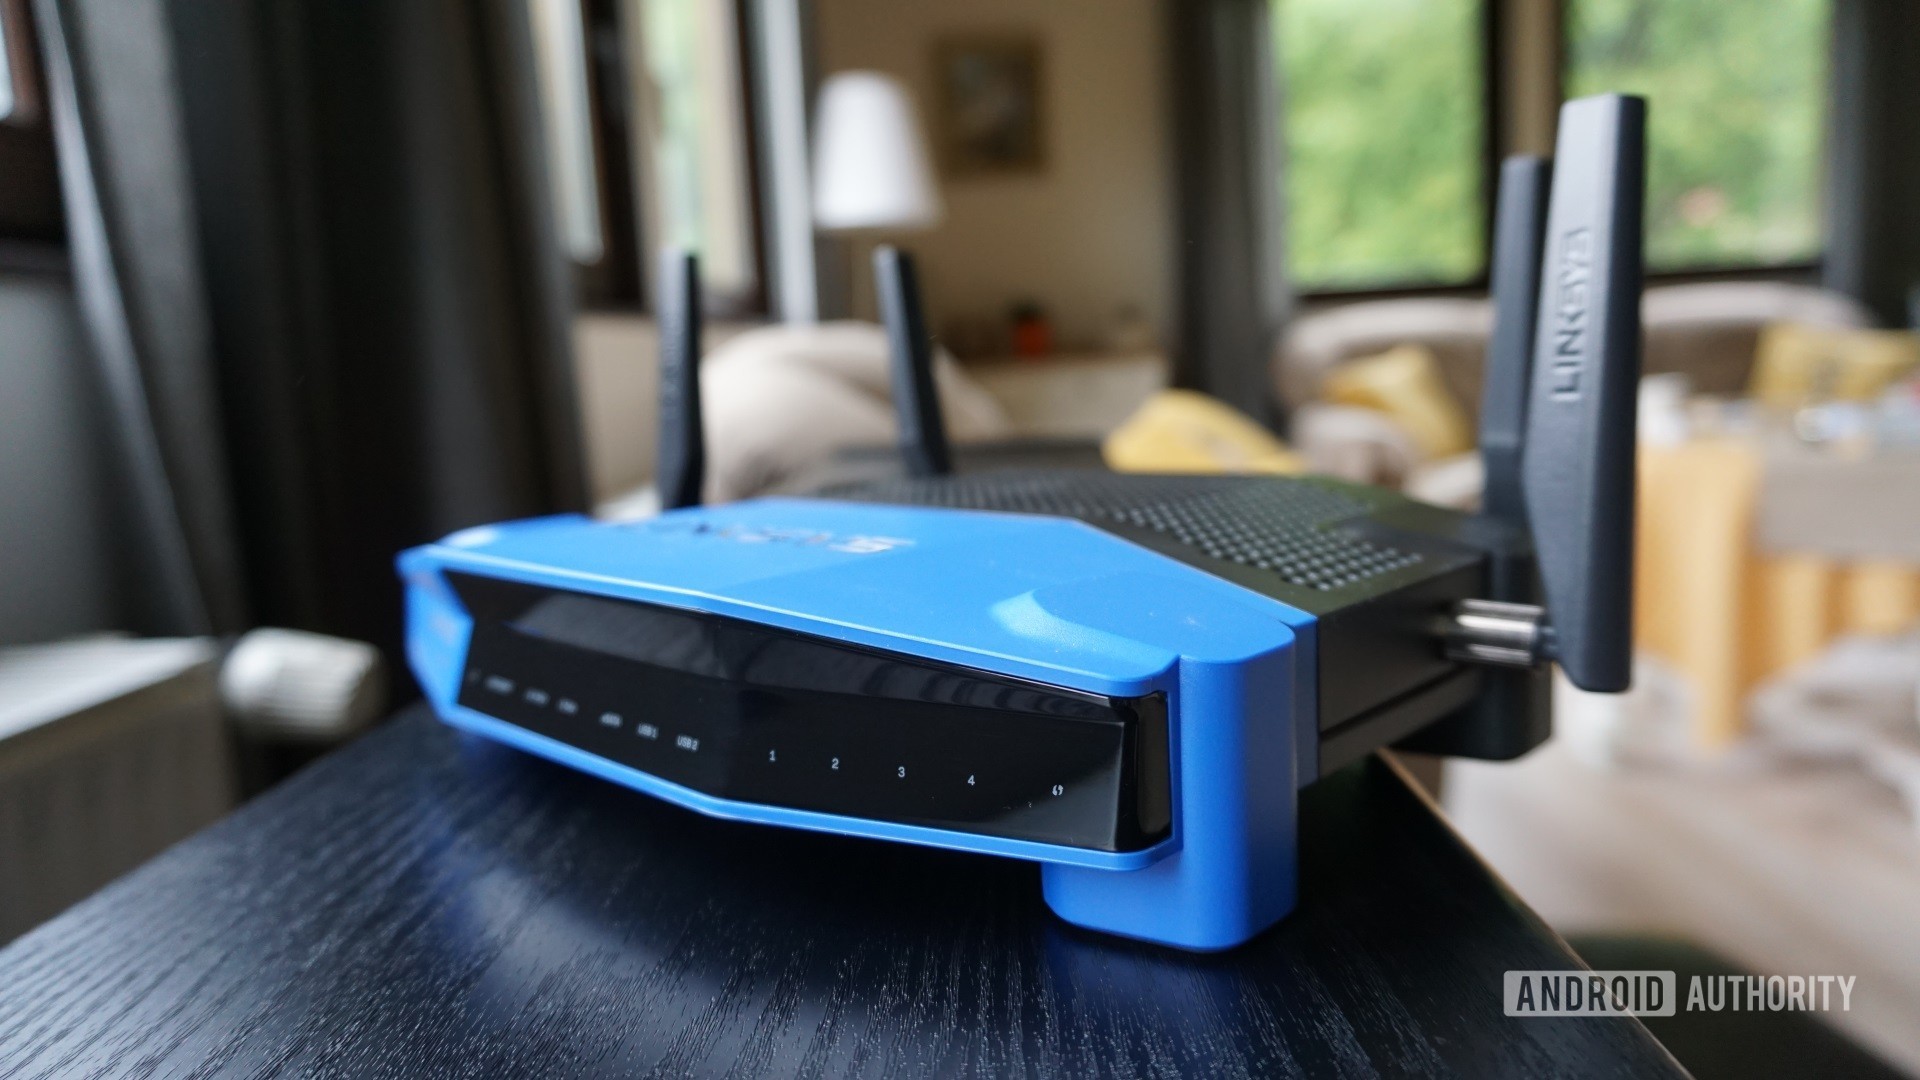 Flashrouters picture of Linksys-3200ACM - What to do when phone won't connect to Wi-Fi